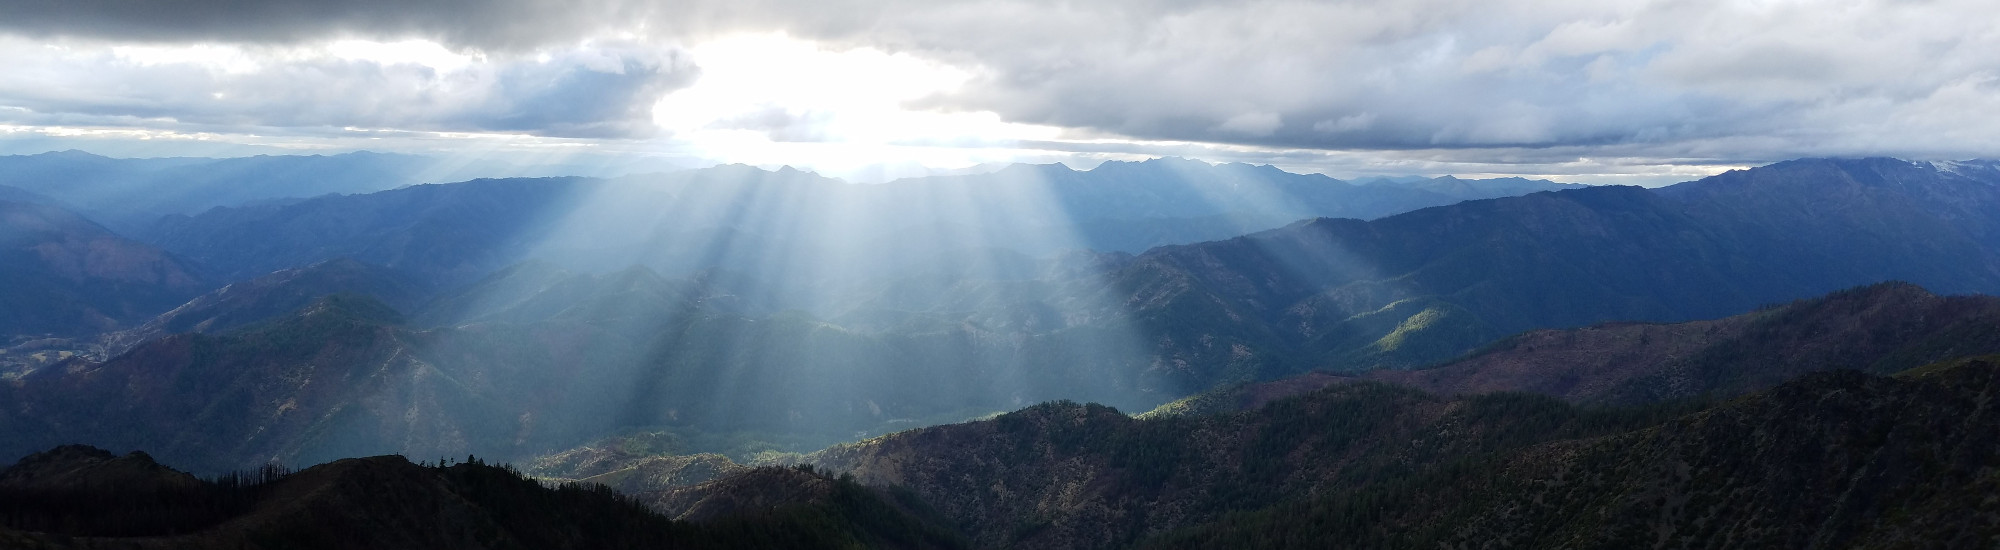 Sunrays from Weaver Bolly Lookout - Photo by Johanna Ostling